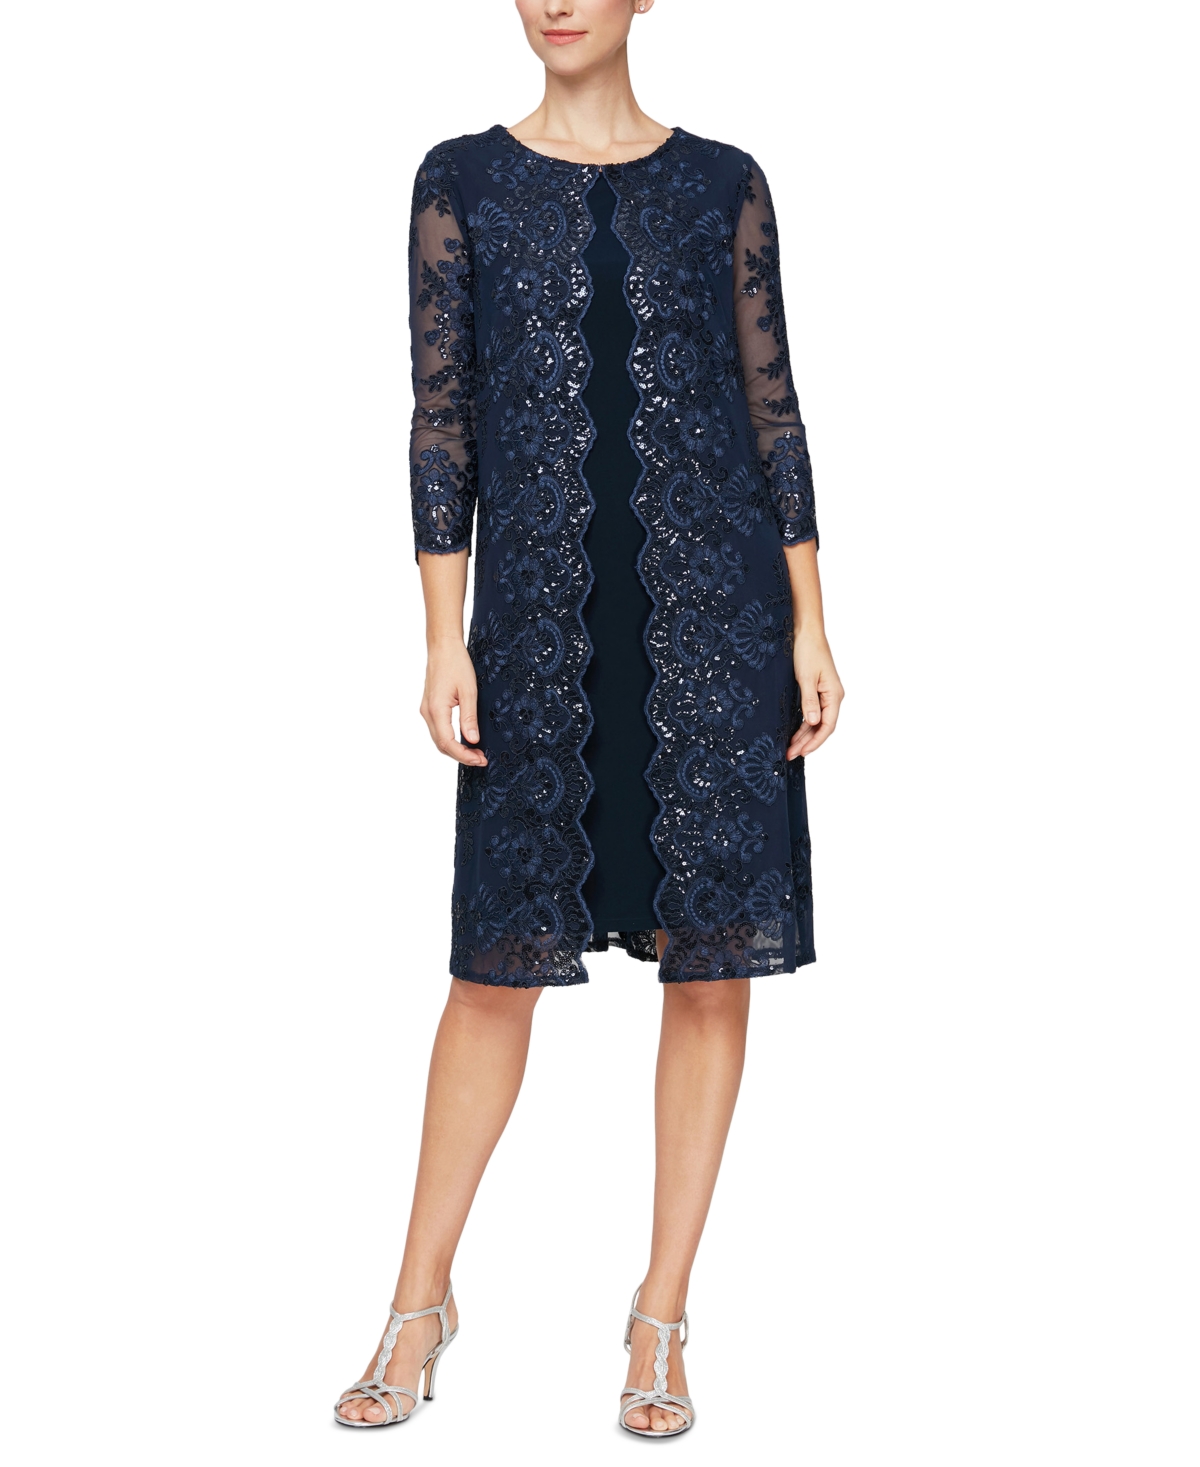 Alex Evenings Embellished Layered-Look Dress